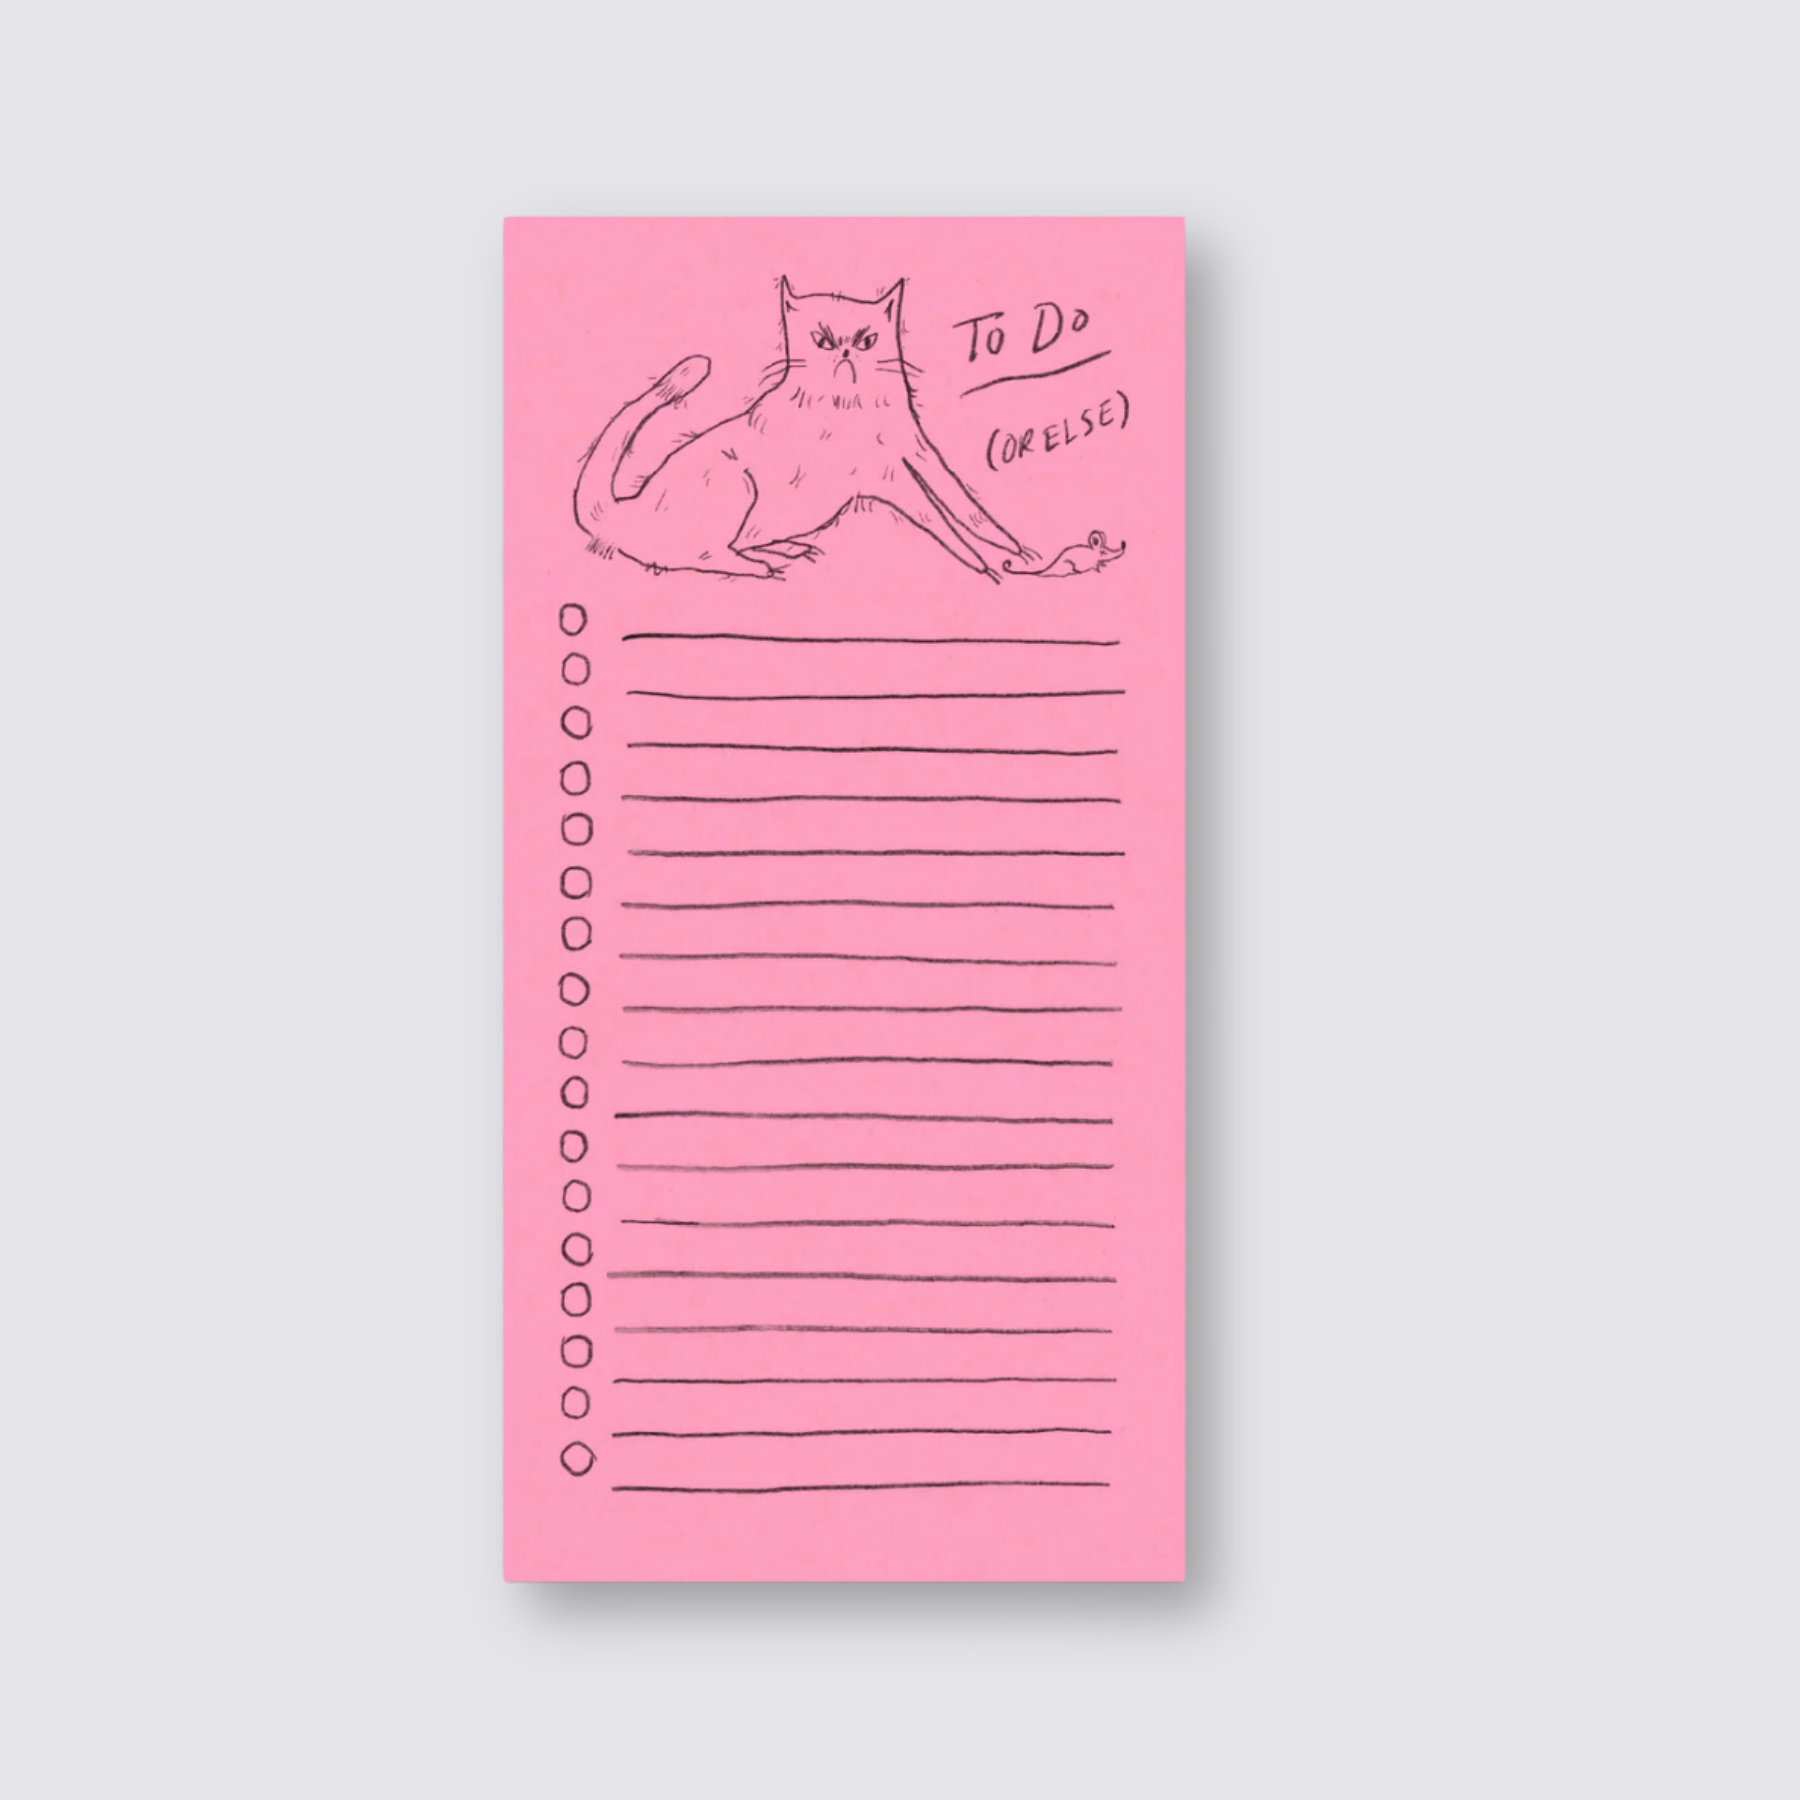 To Do Or Else Notepad